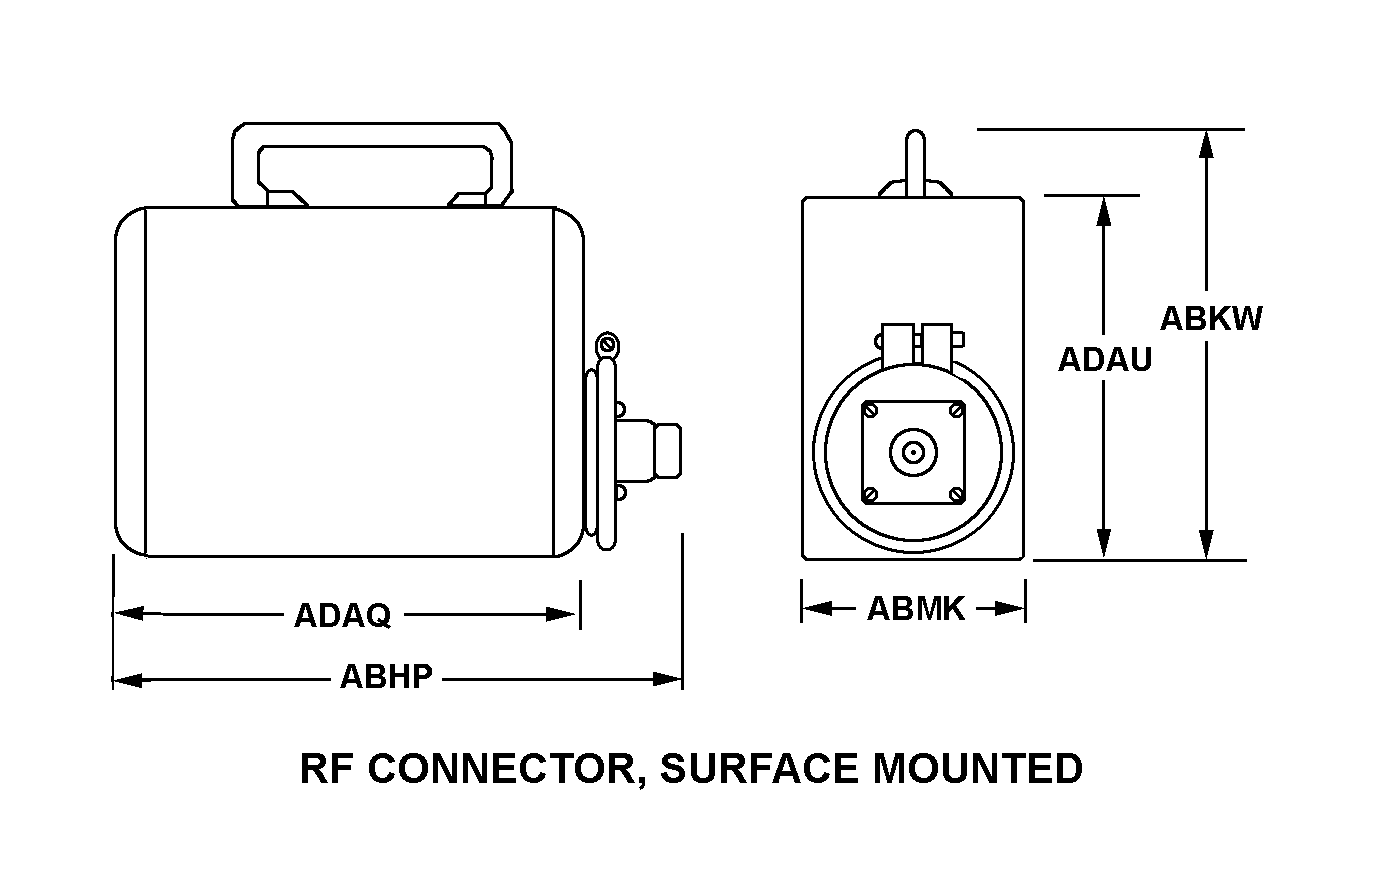 RF CONNECTOR, SURFACE MOUNTED style nsn 5985-00-019-6315